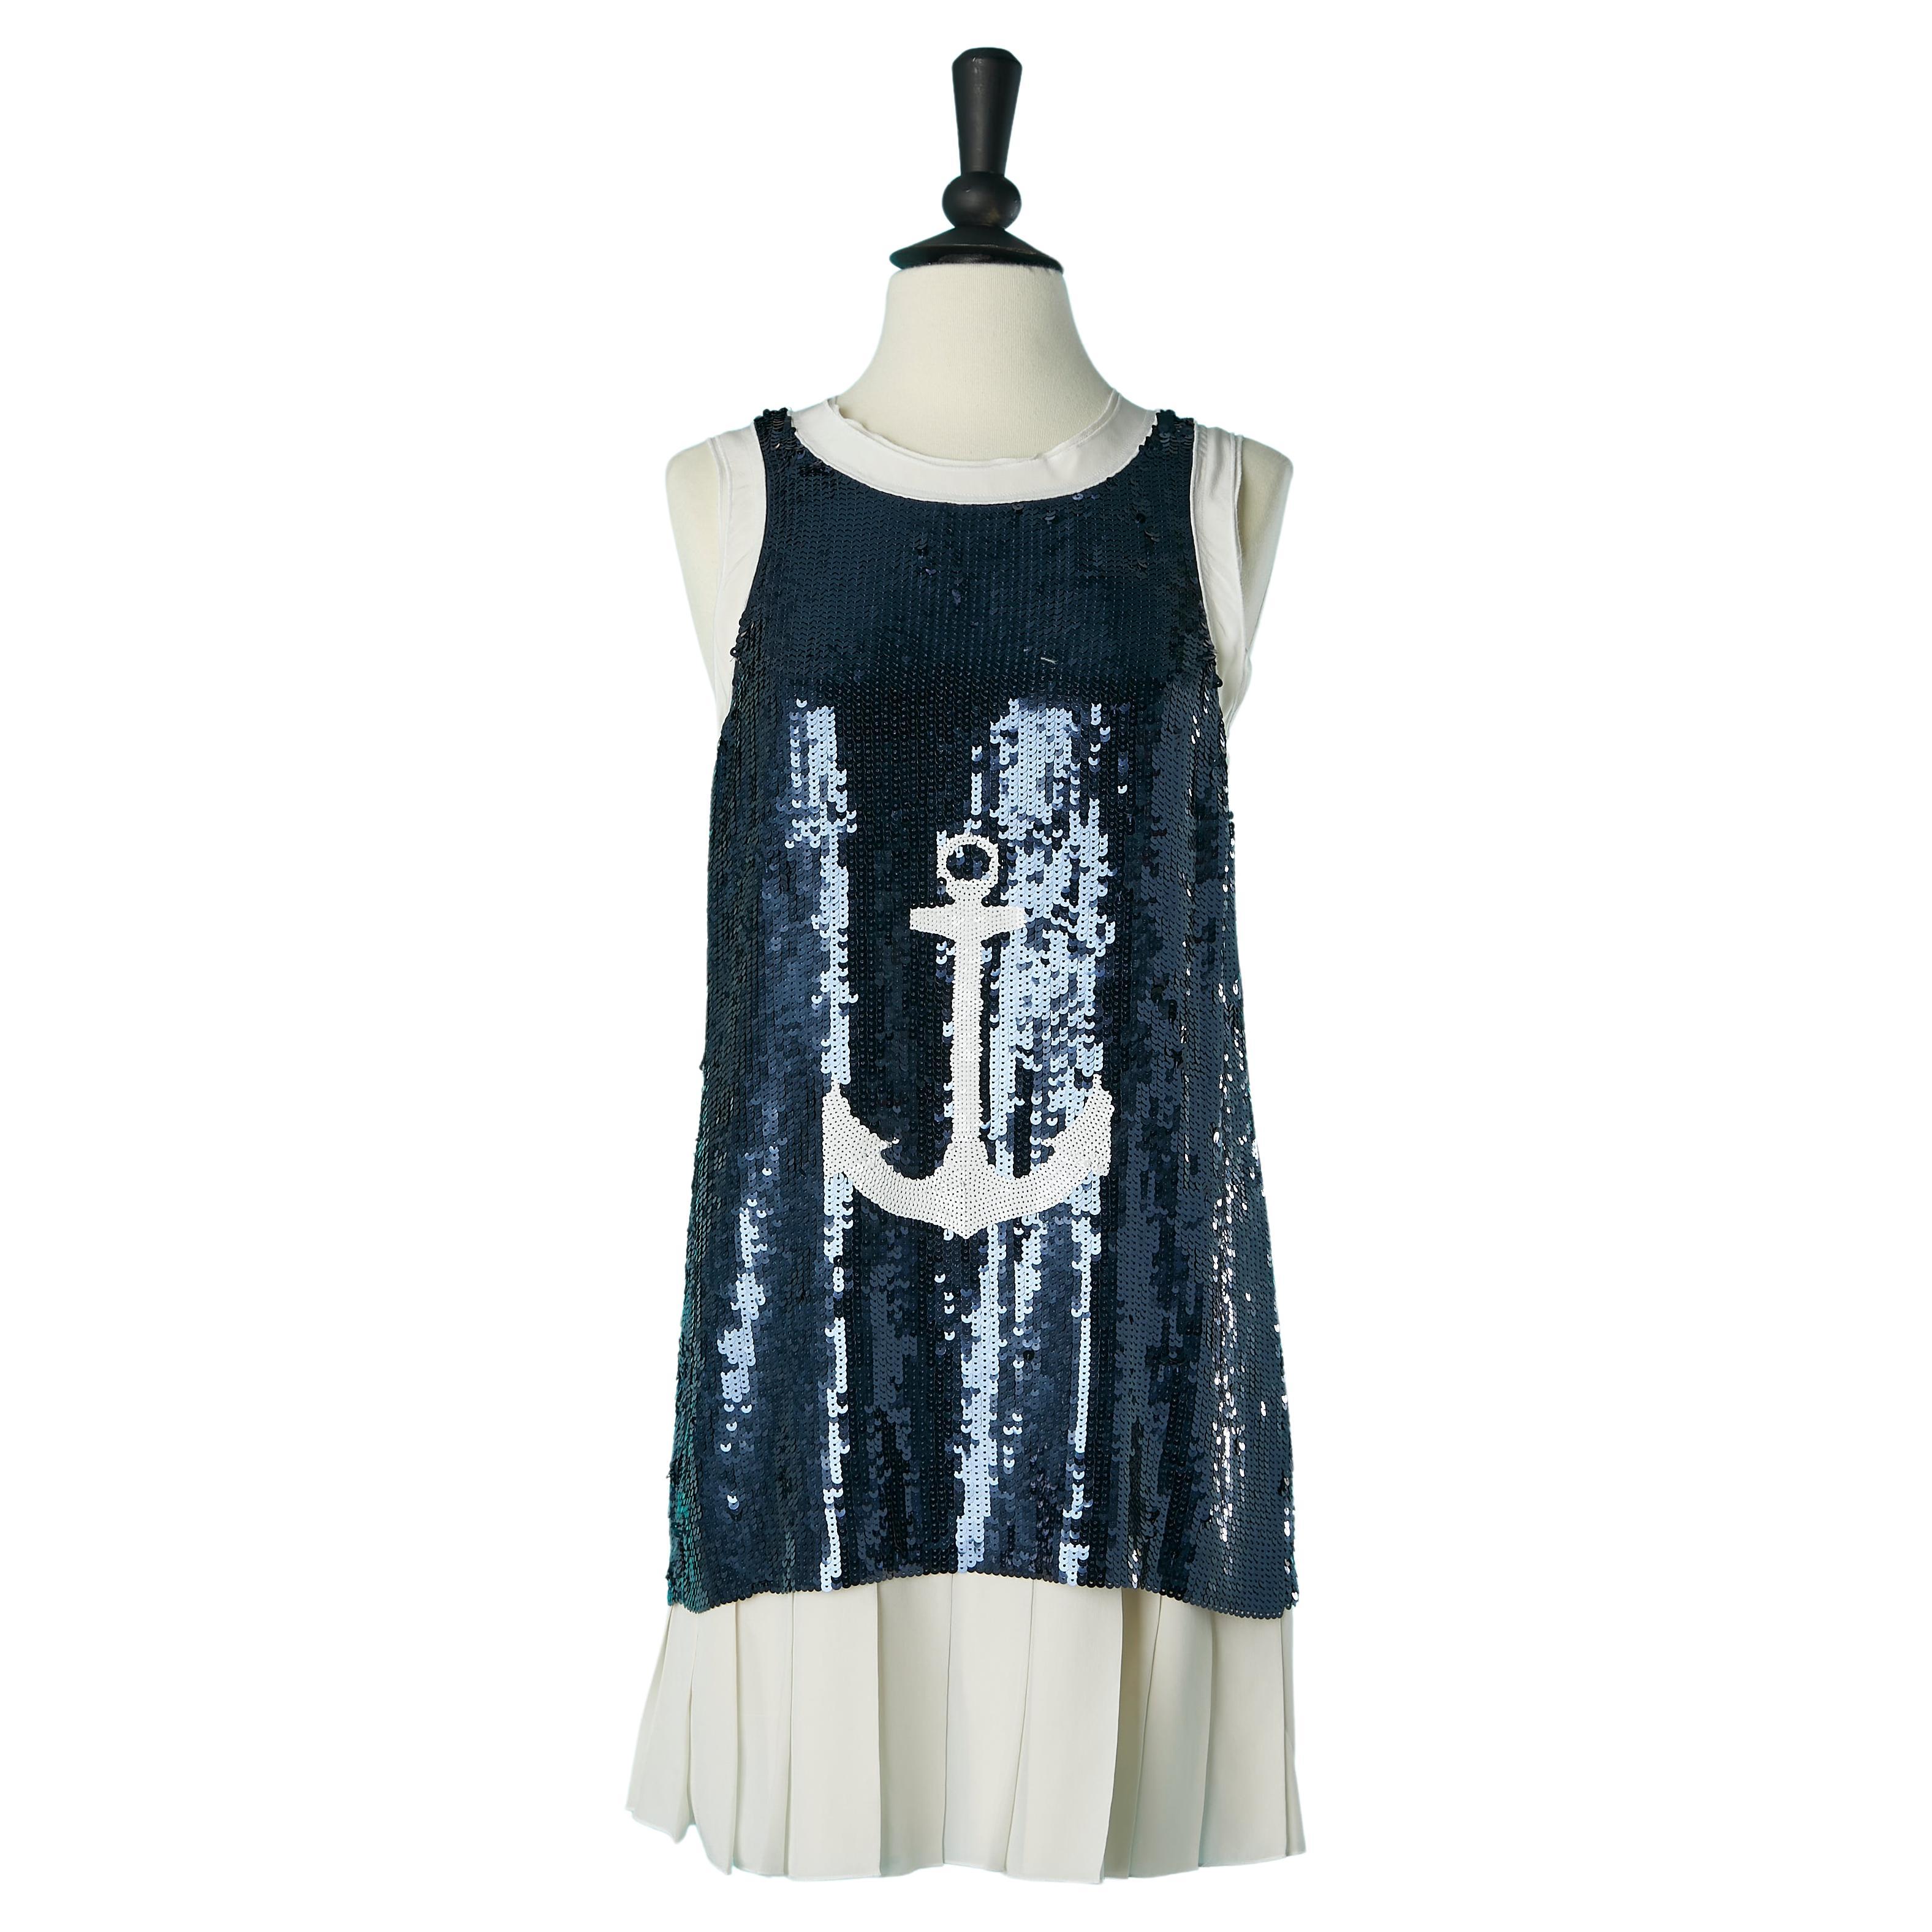 Mini dress in blue sequin with Anchor pattern and pleated bottom edge D&G  For Sale